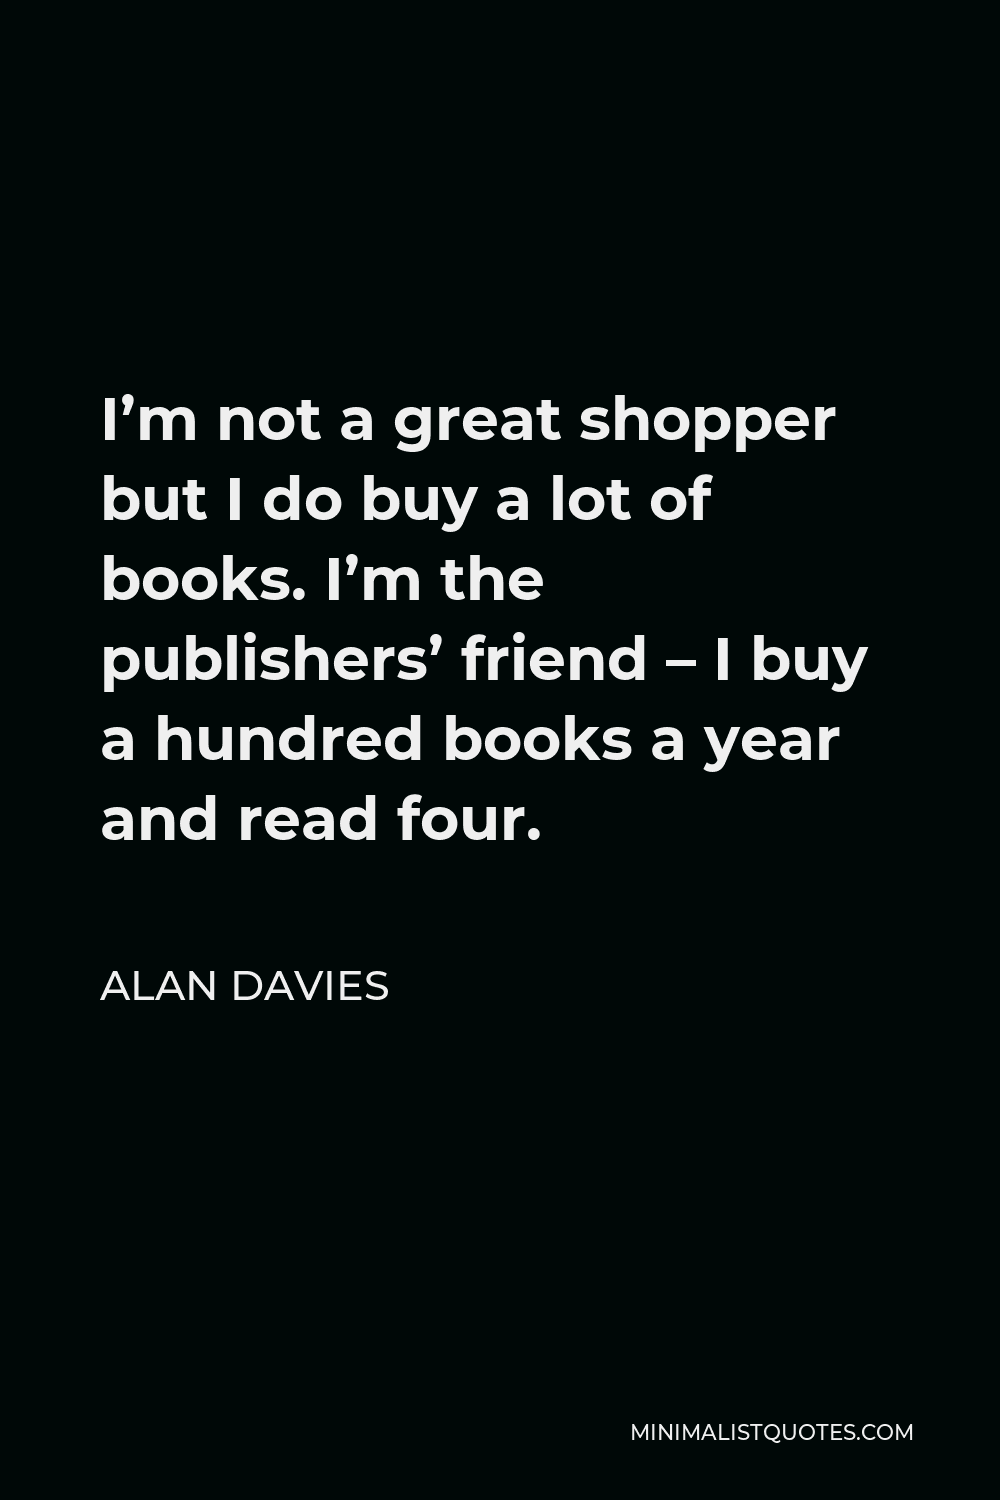 Alan Davies Quote - I’m not a great shopper but I do buy a lot of books. I’m the publishers’ friend – I buy a hundred books a year and read four.